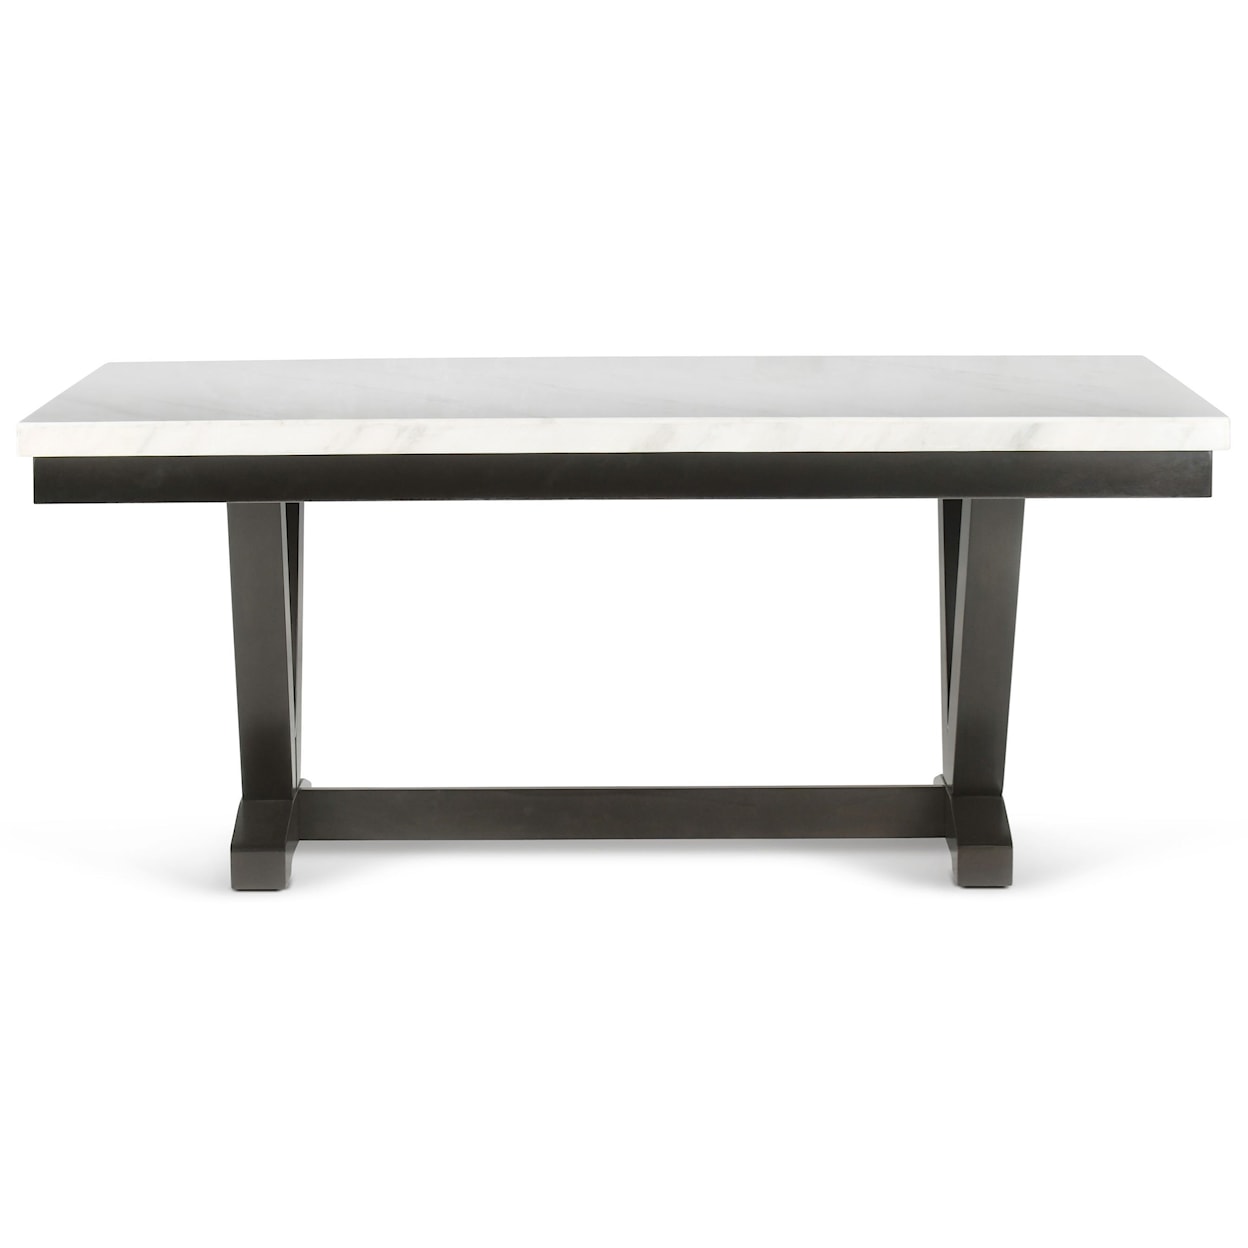 Prime Finley Dining Table